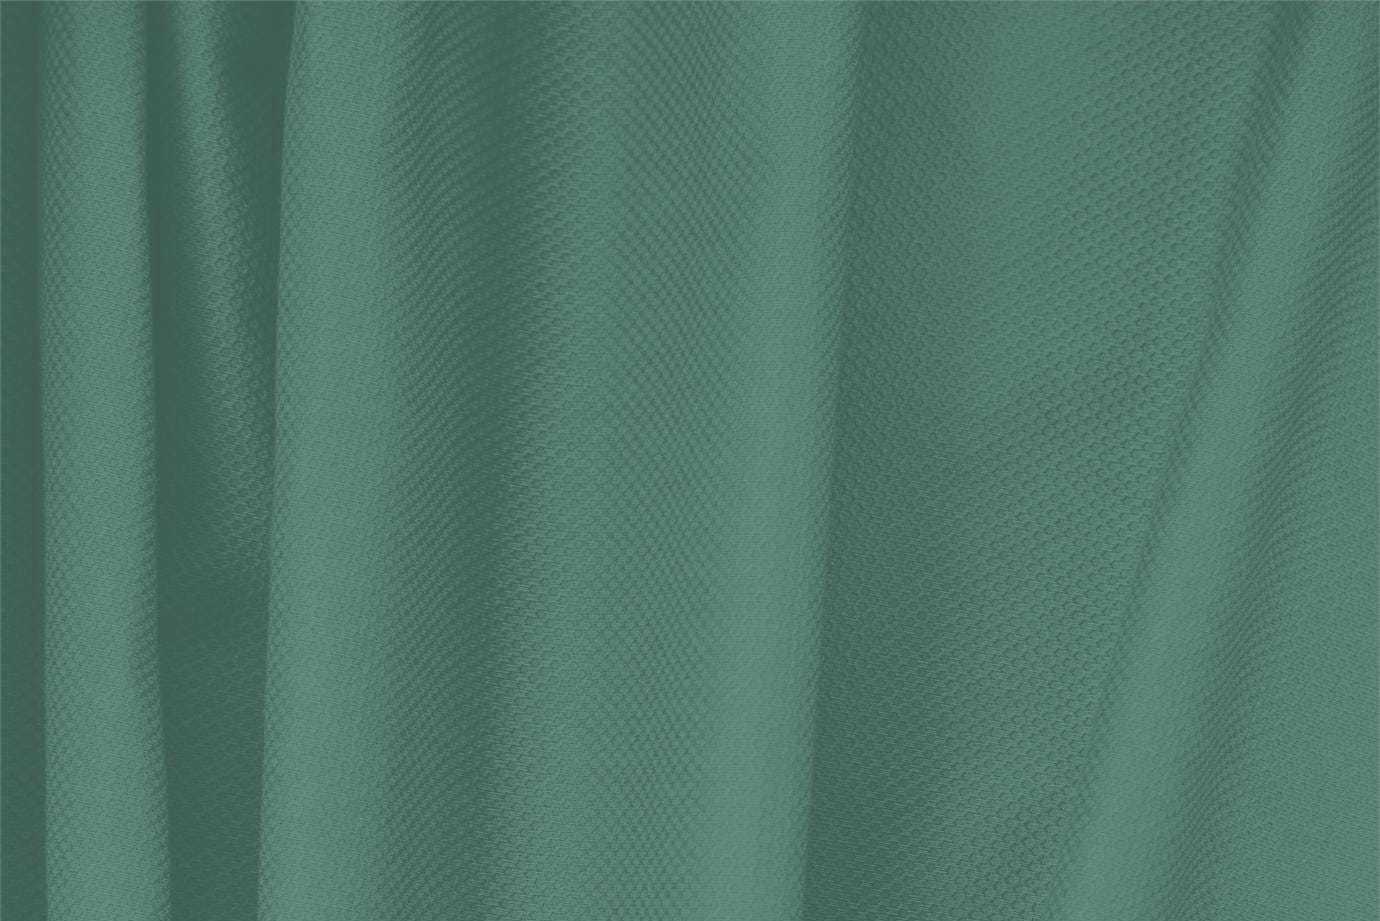 Bumblebee Green Cotton, Stretch Pique Stretch fabric for dressmaking